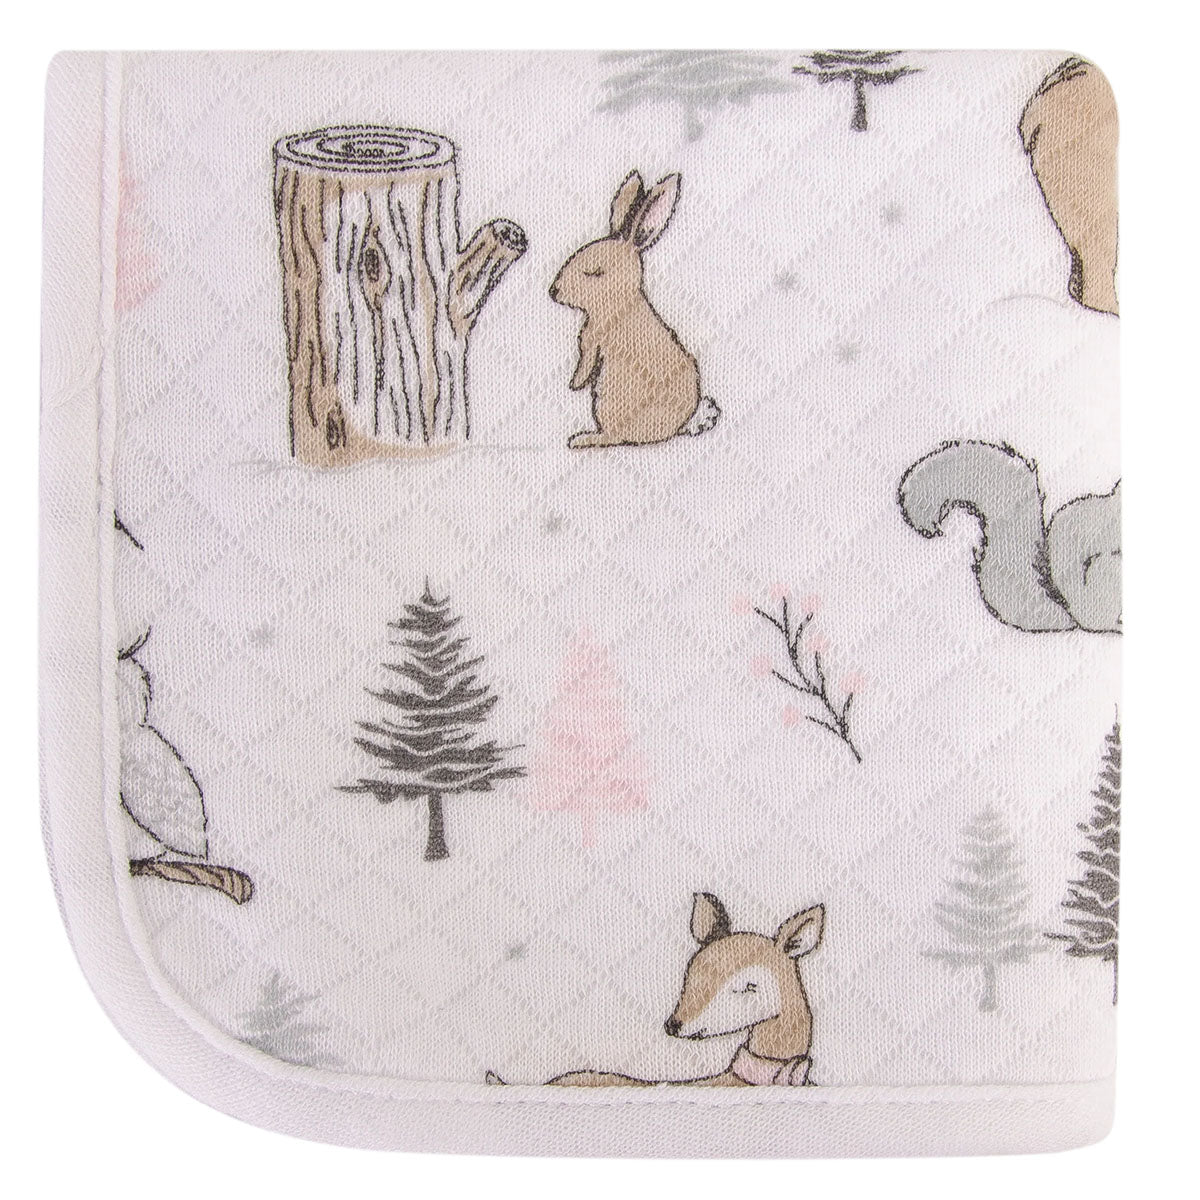 Hudson Baby - 6pc Quilted Washcloths - Winter Forest